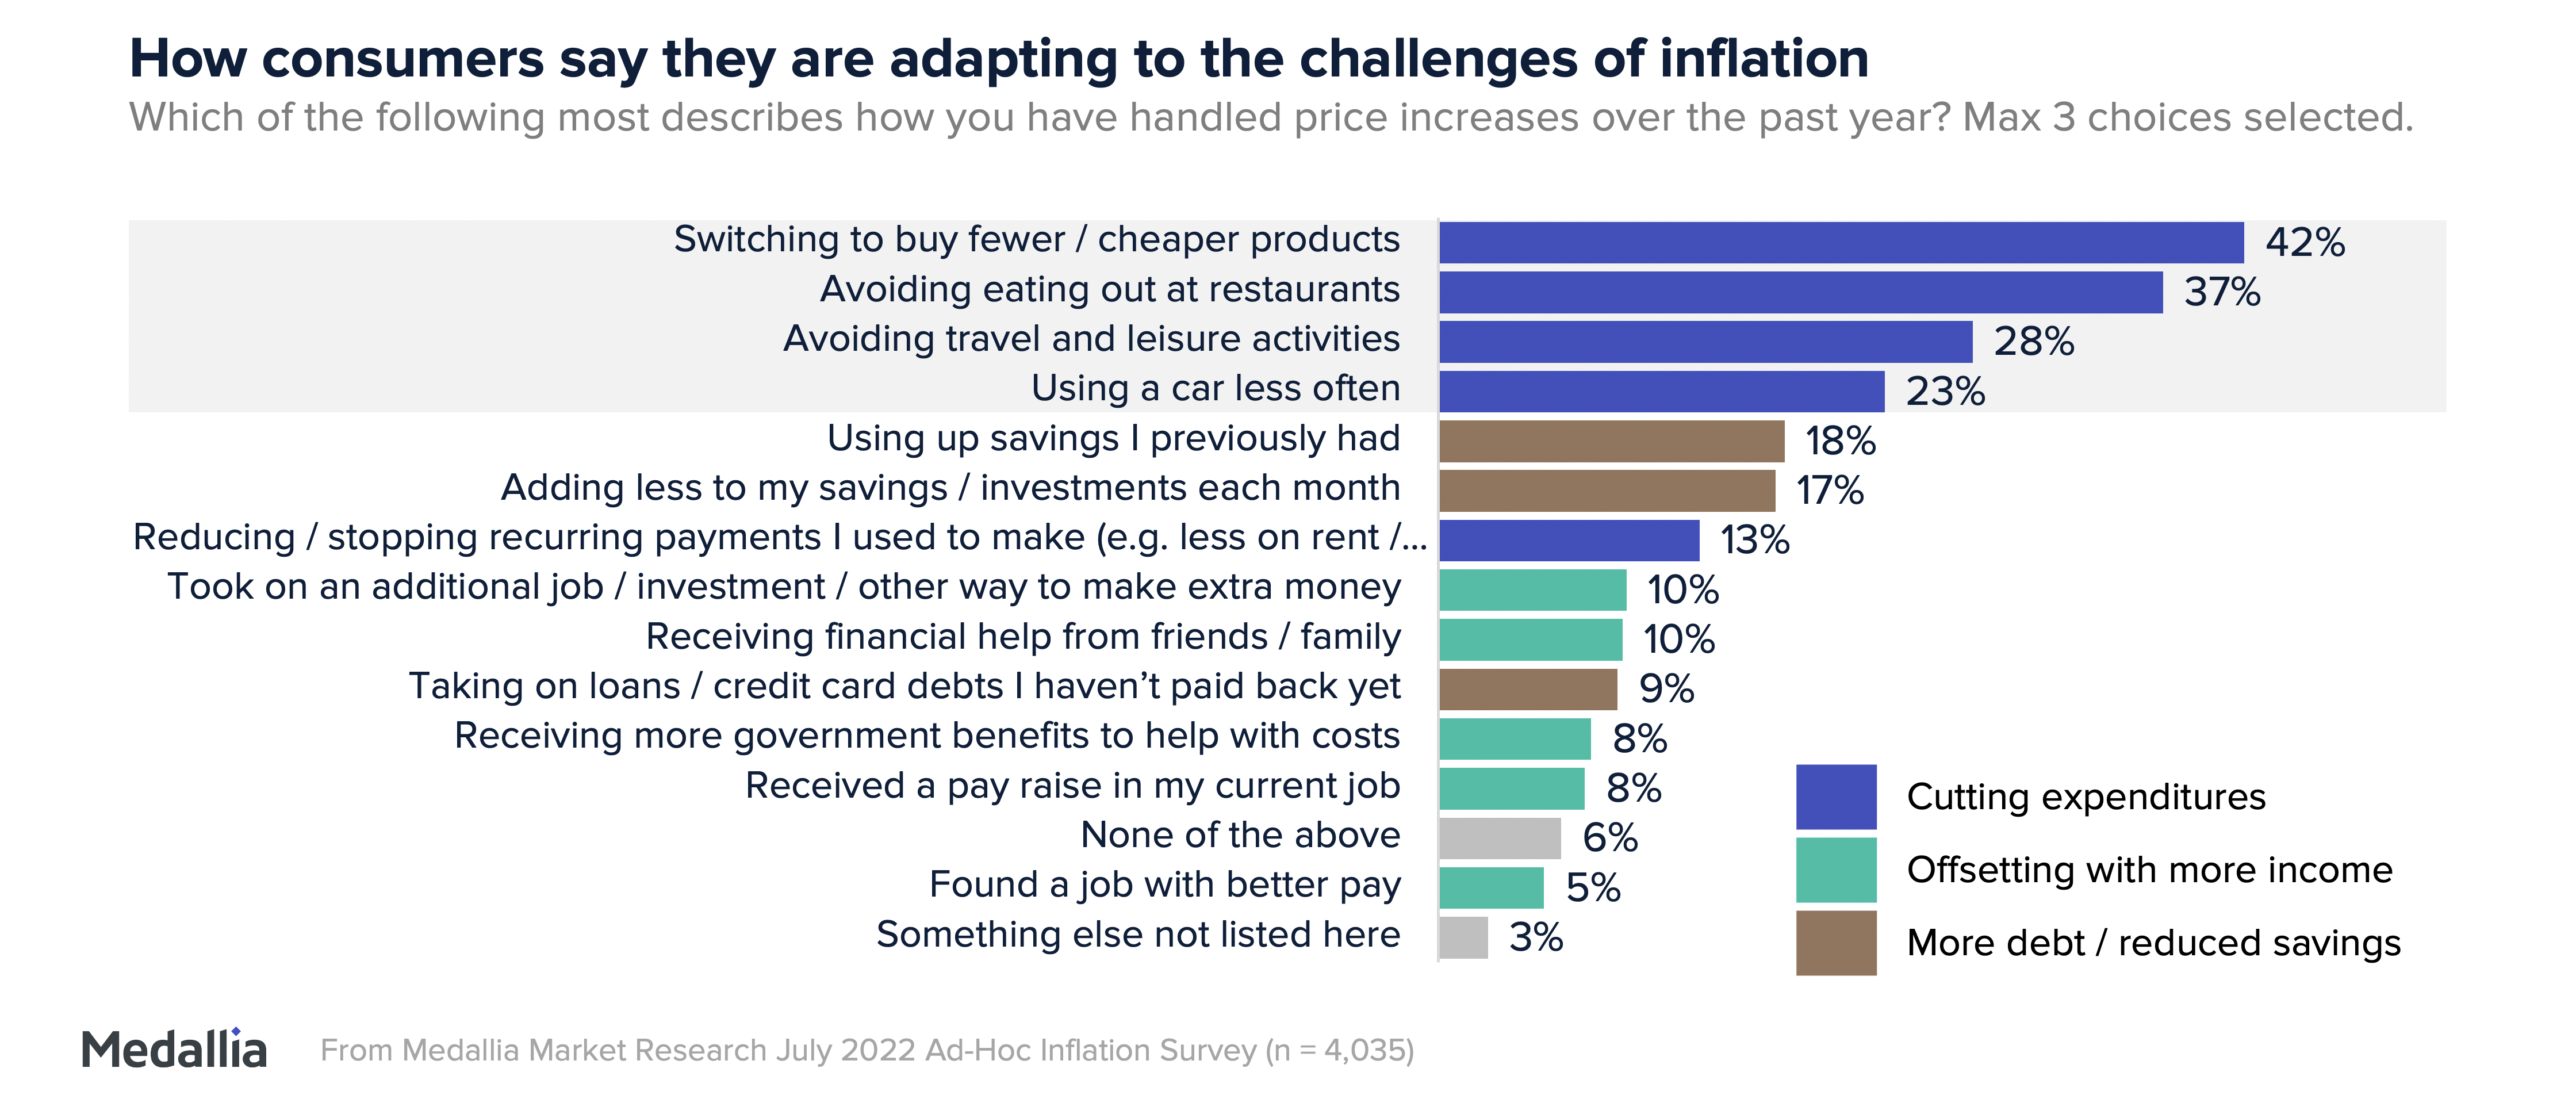 How consumers say they are adapting to the challenges of inflation. The highest response is 42% are switching to buying fewer or cheaper products.